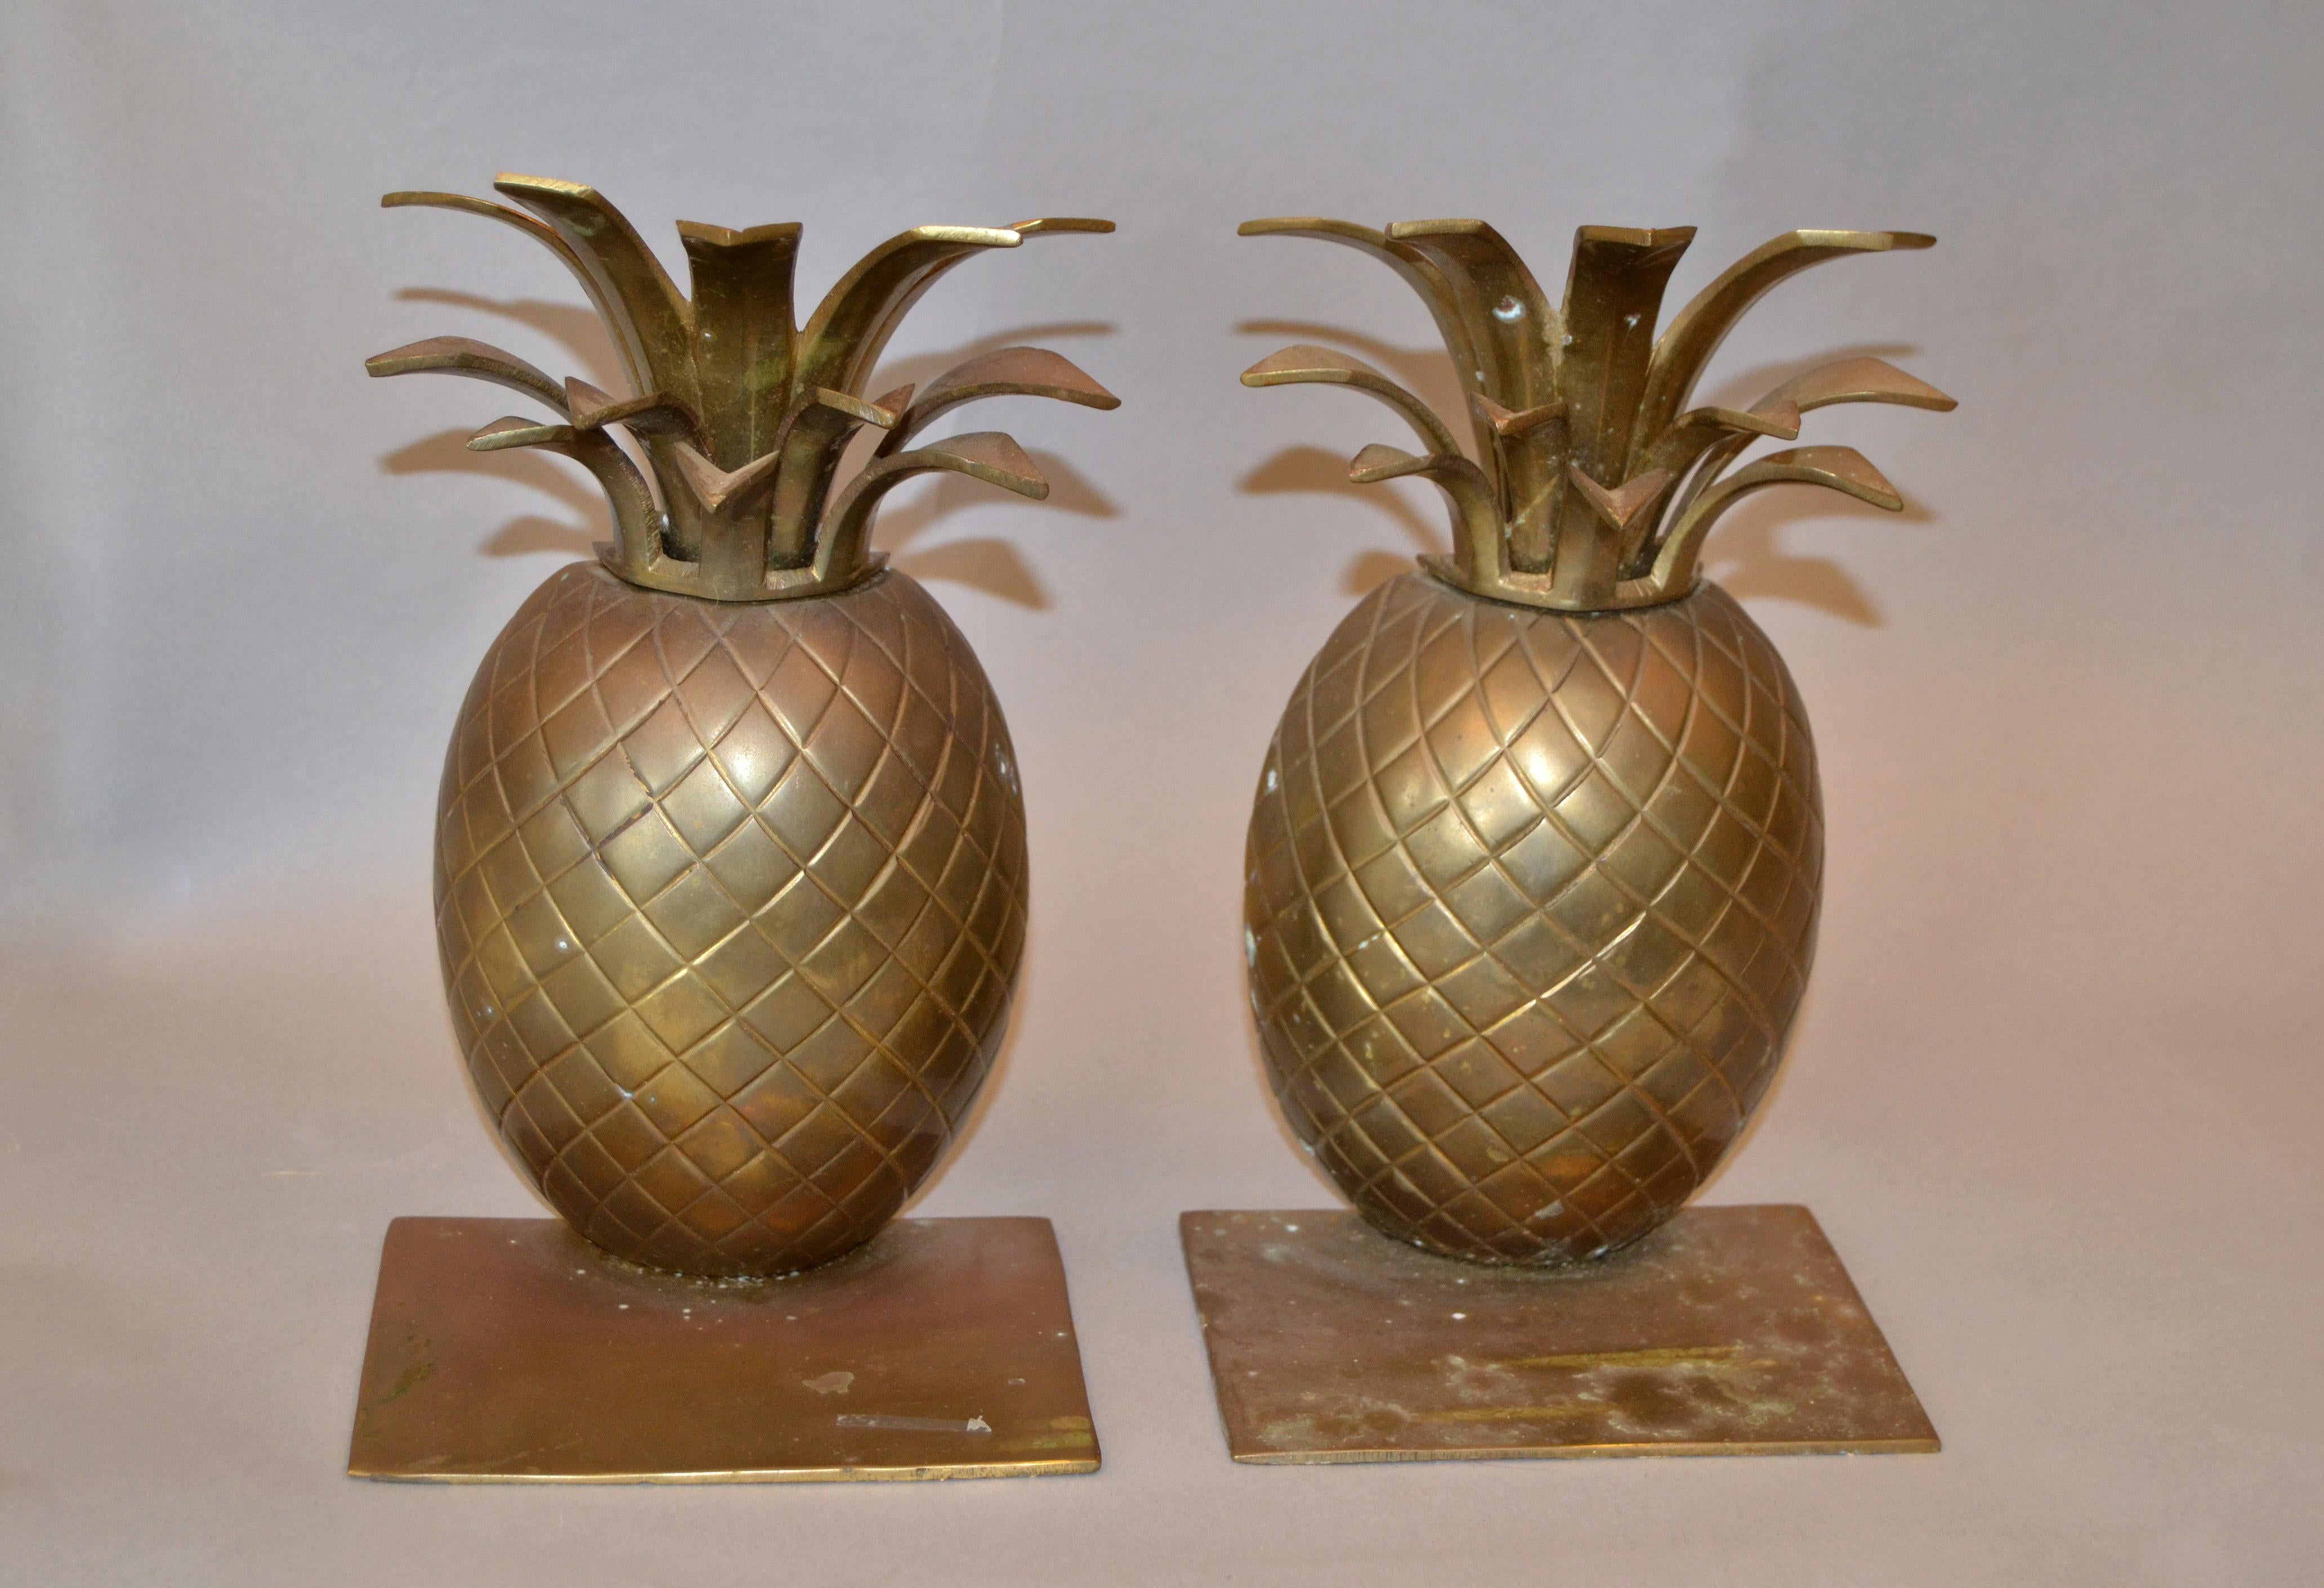 American Mid-Century Modern Handcrafted Bronze Pineapple Bookends